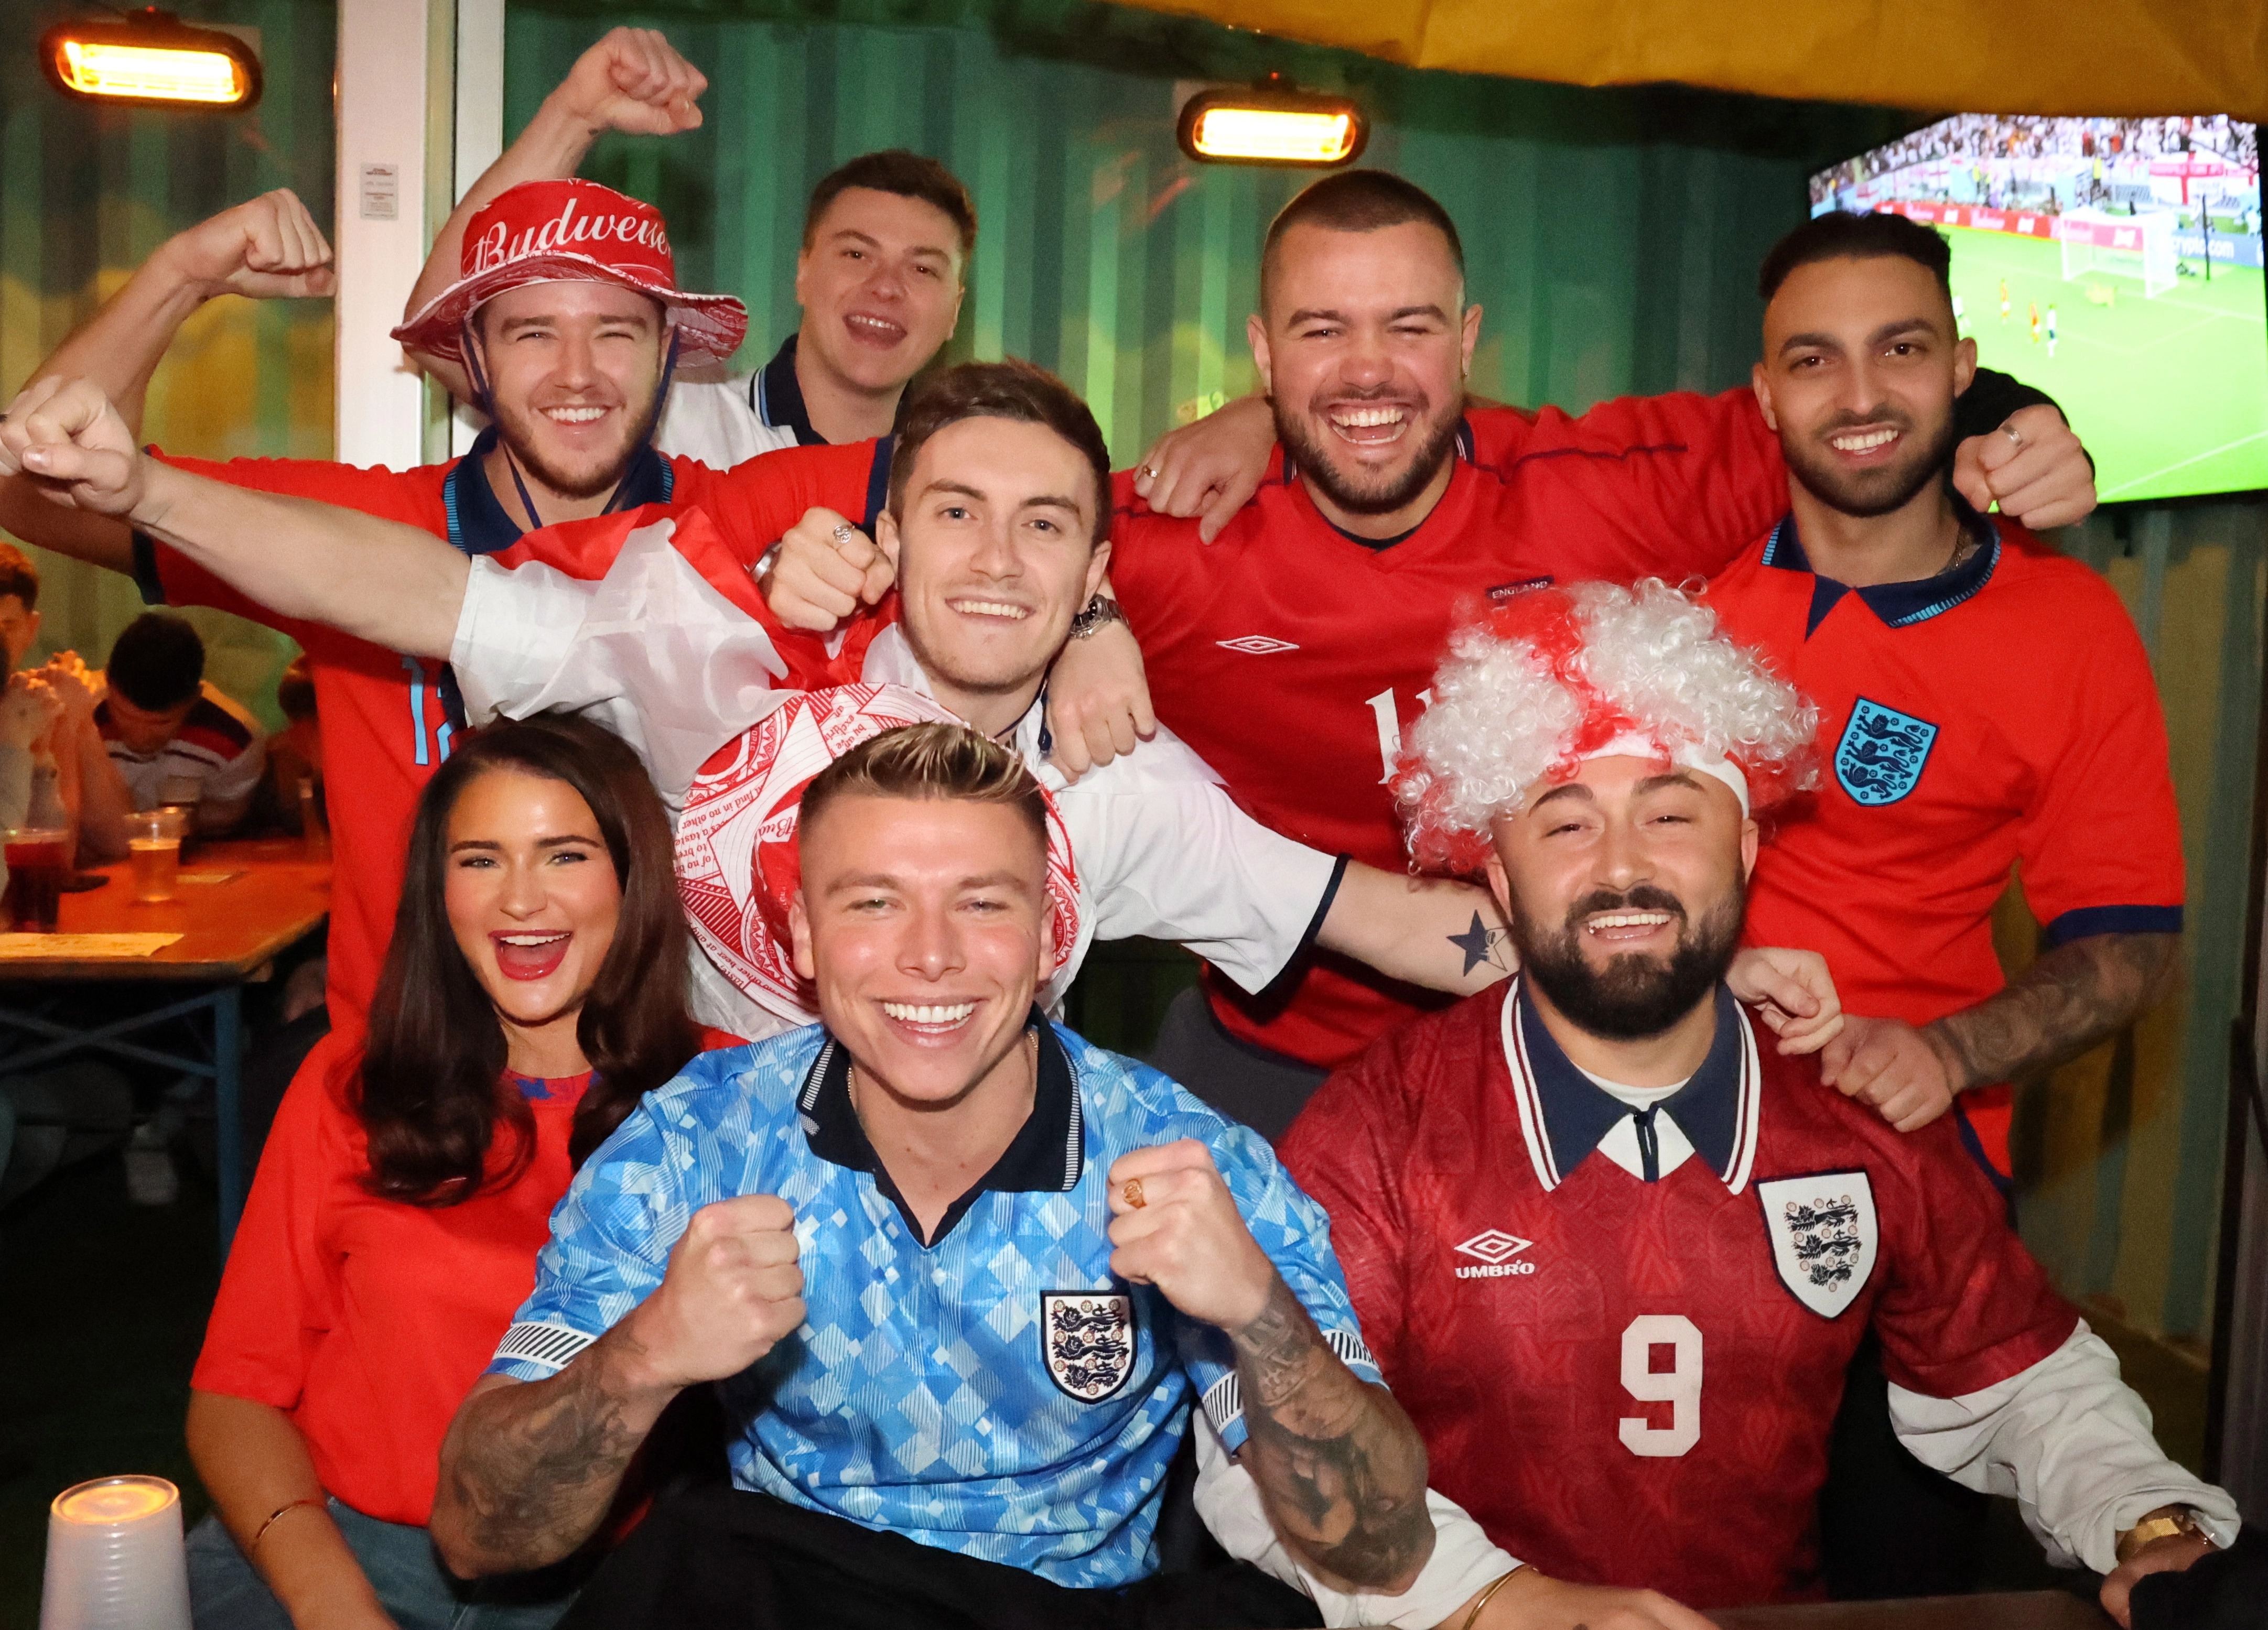 , England fans nurse sore heads after celebrating 3-0 victory against Senegal – as Three Lions head into quarter finals